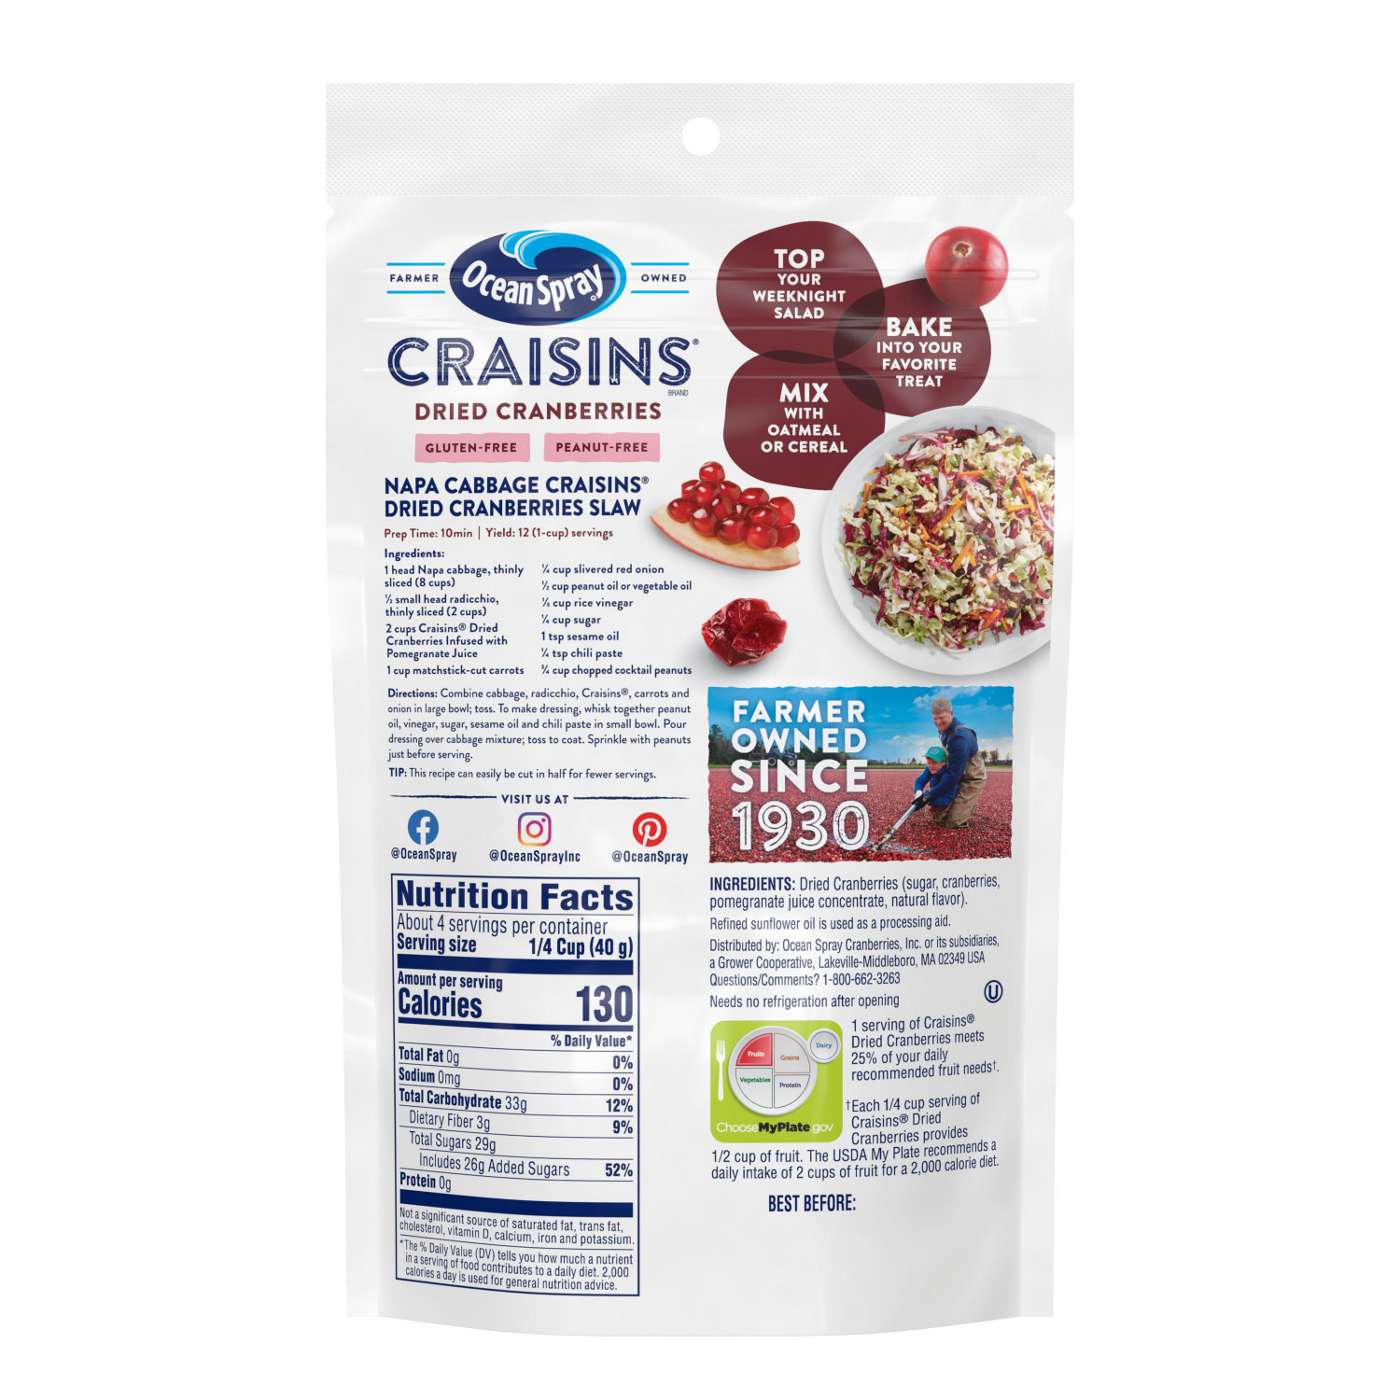 Ocean Spray Craisins Pomegranate Juice Infused Dried Cranberries; image 5 of 6